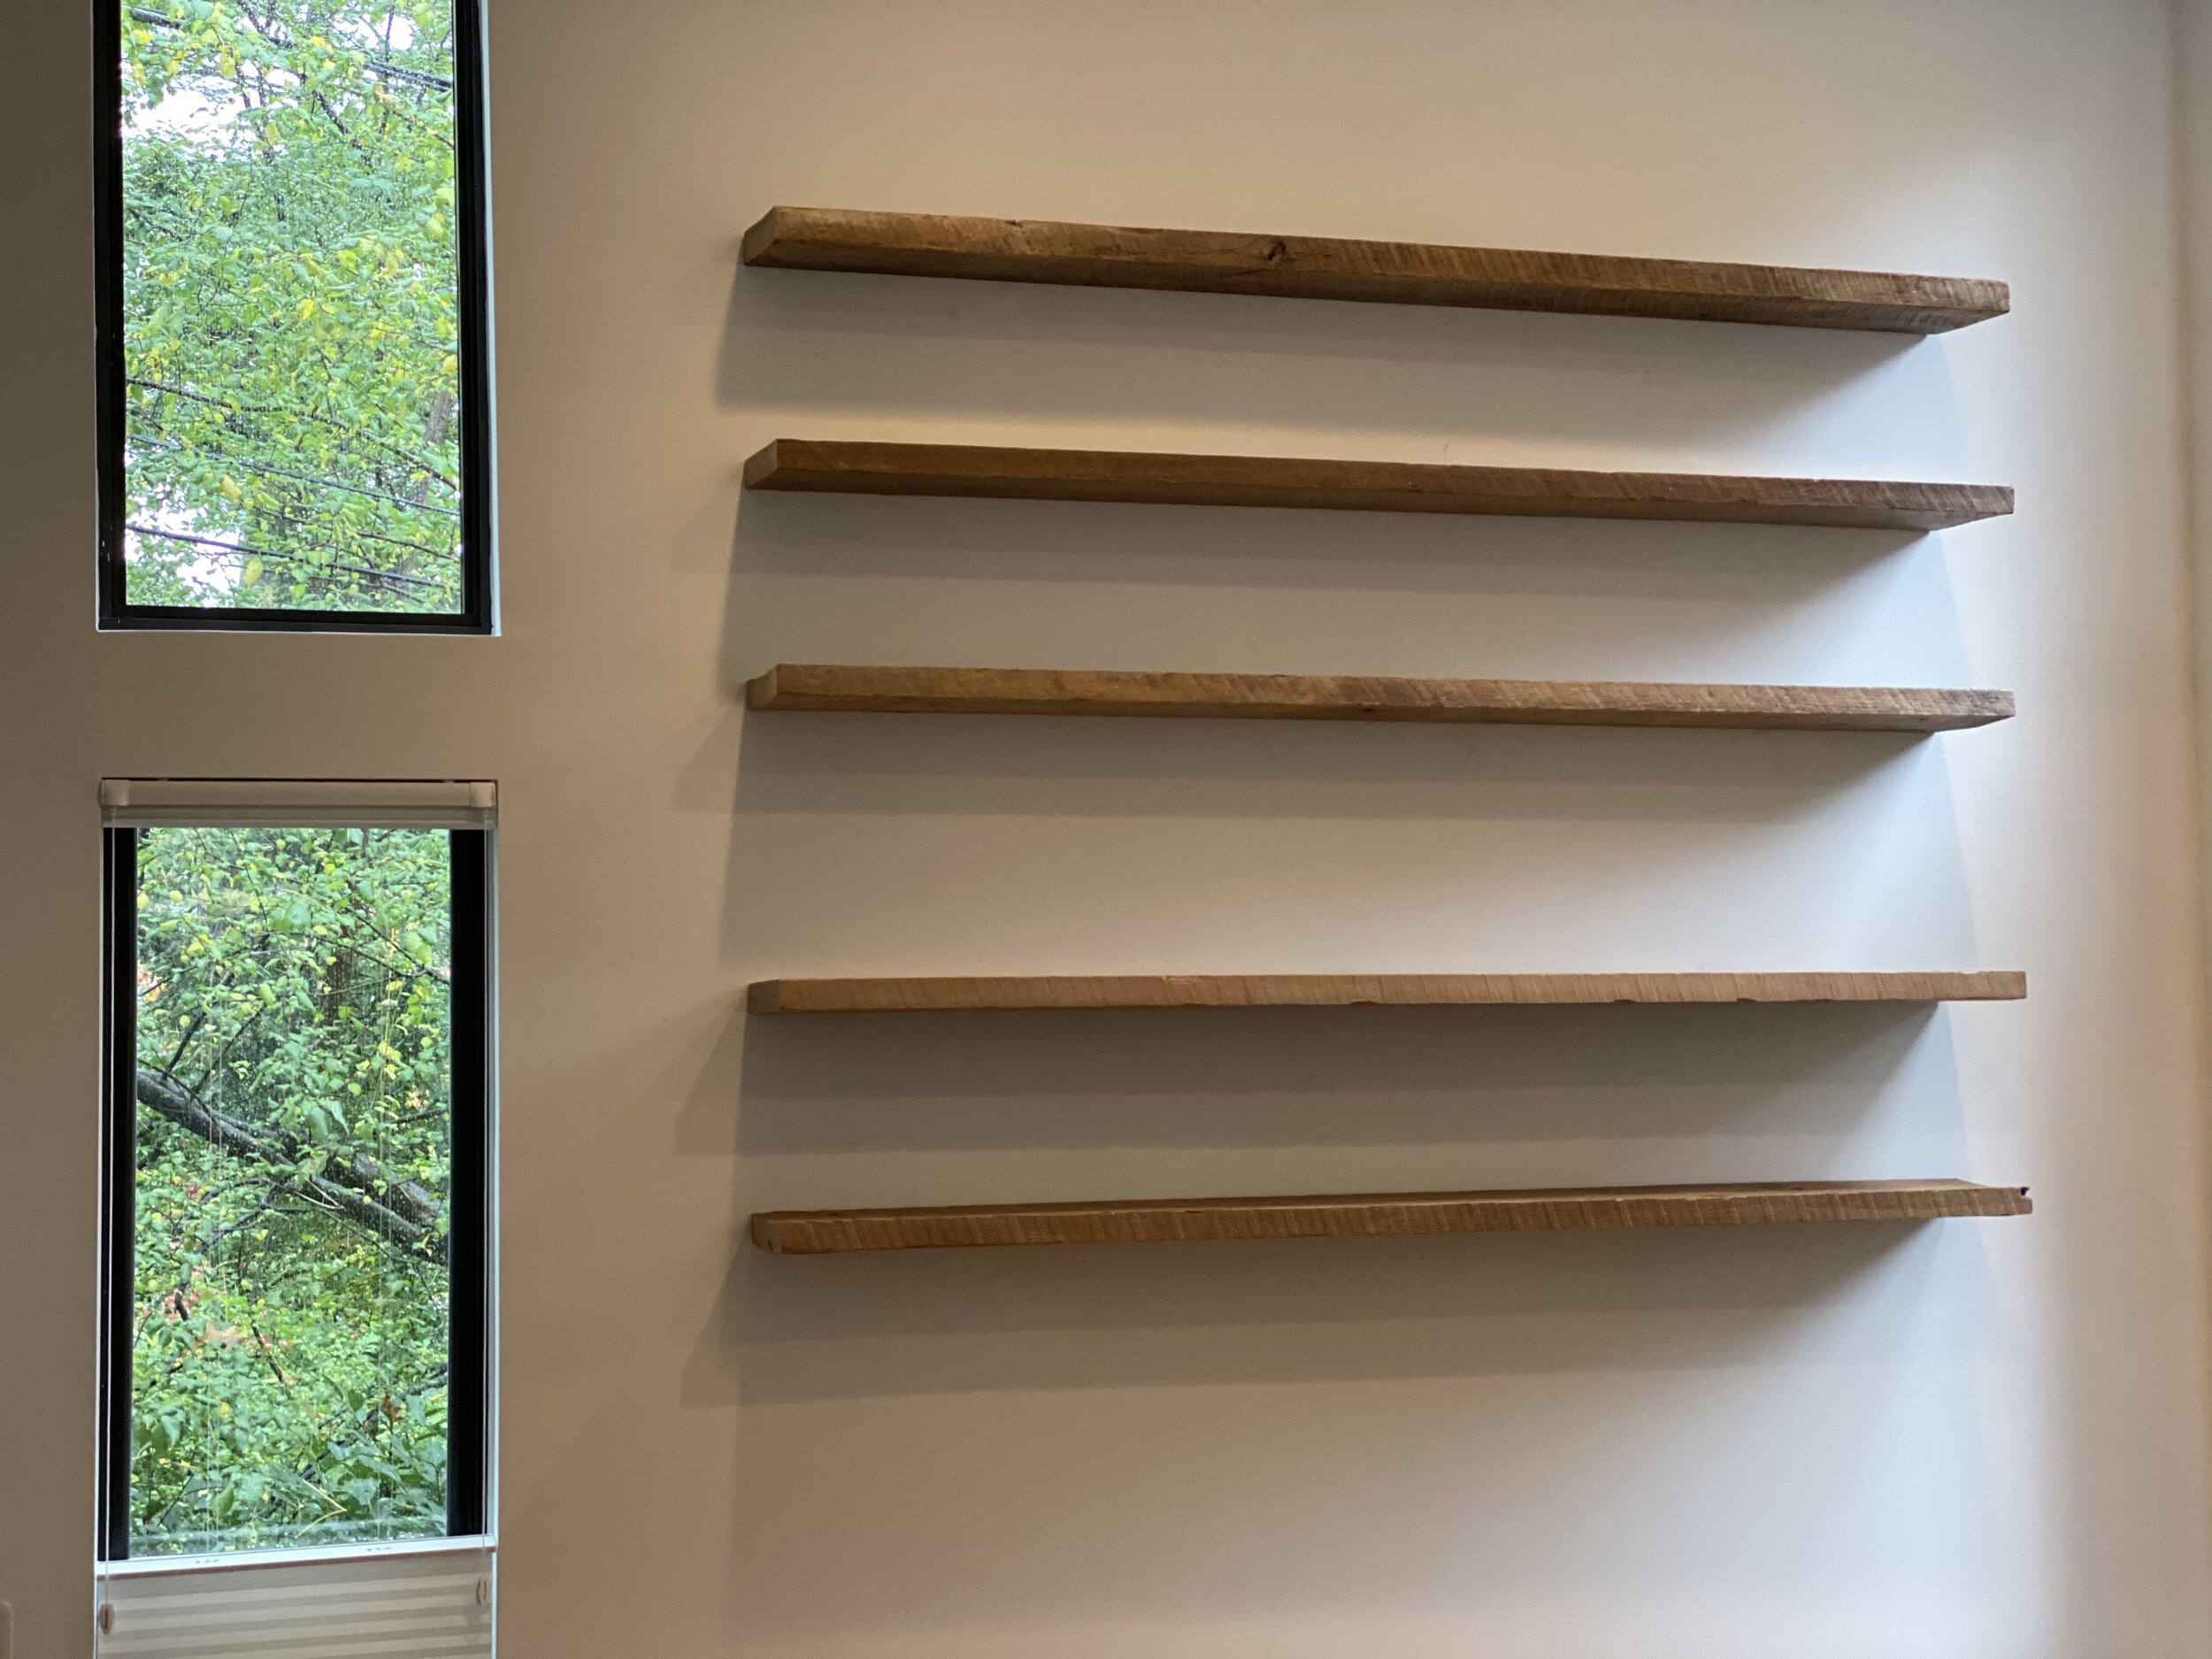 Why Solid Wood Floating Shelves, Are Floating Shelves Strong